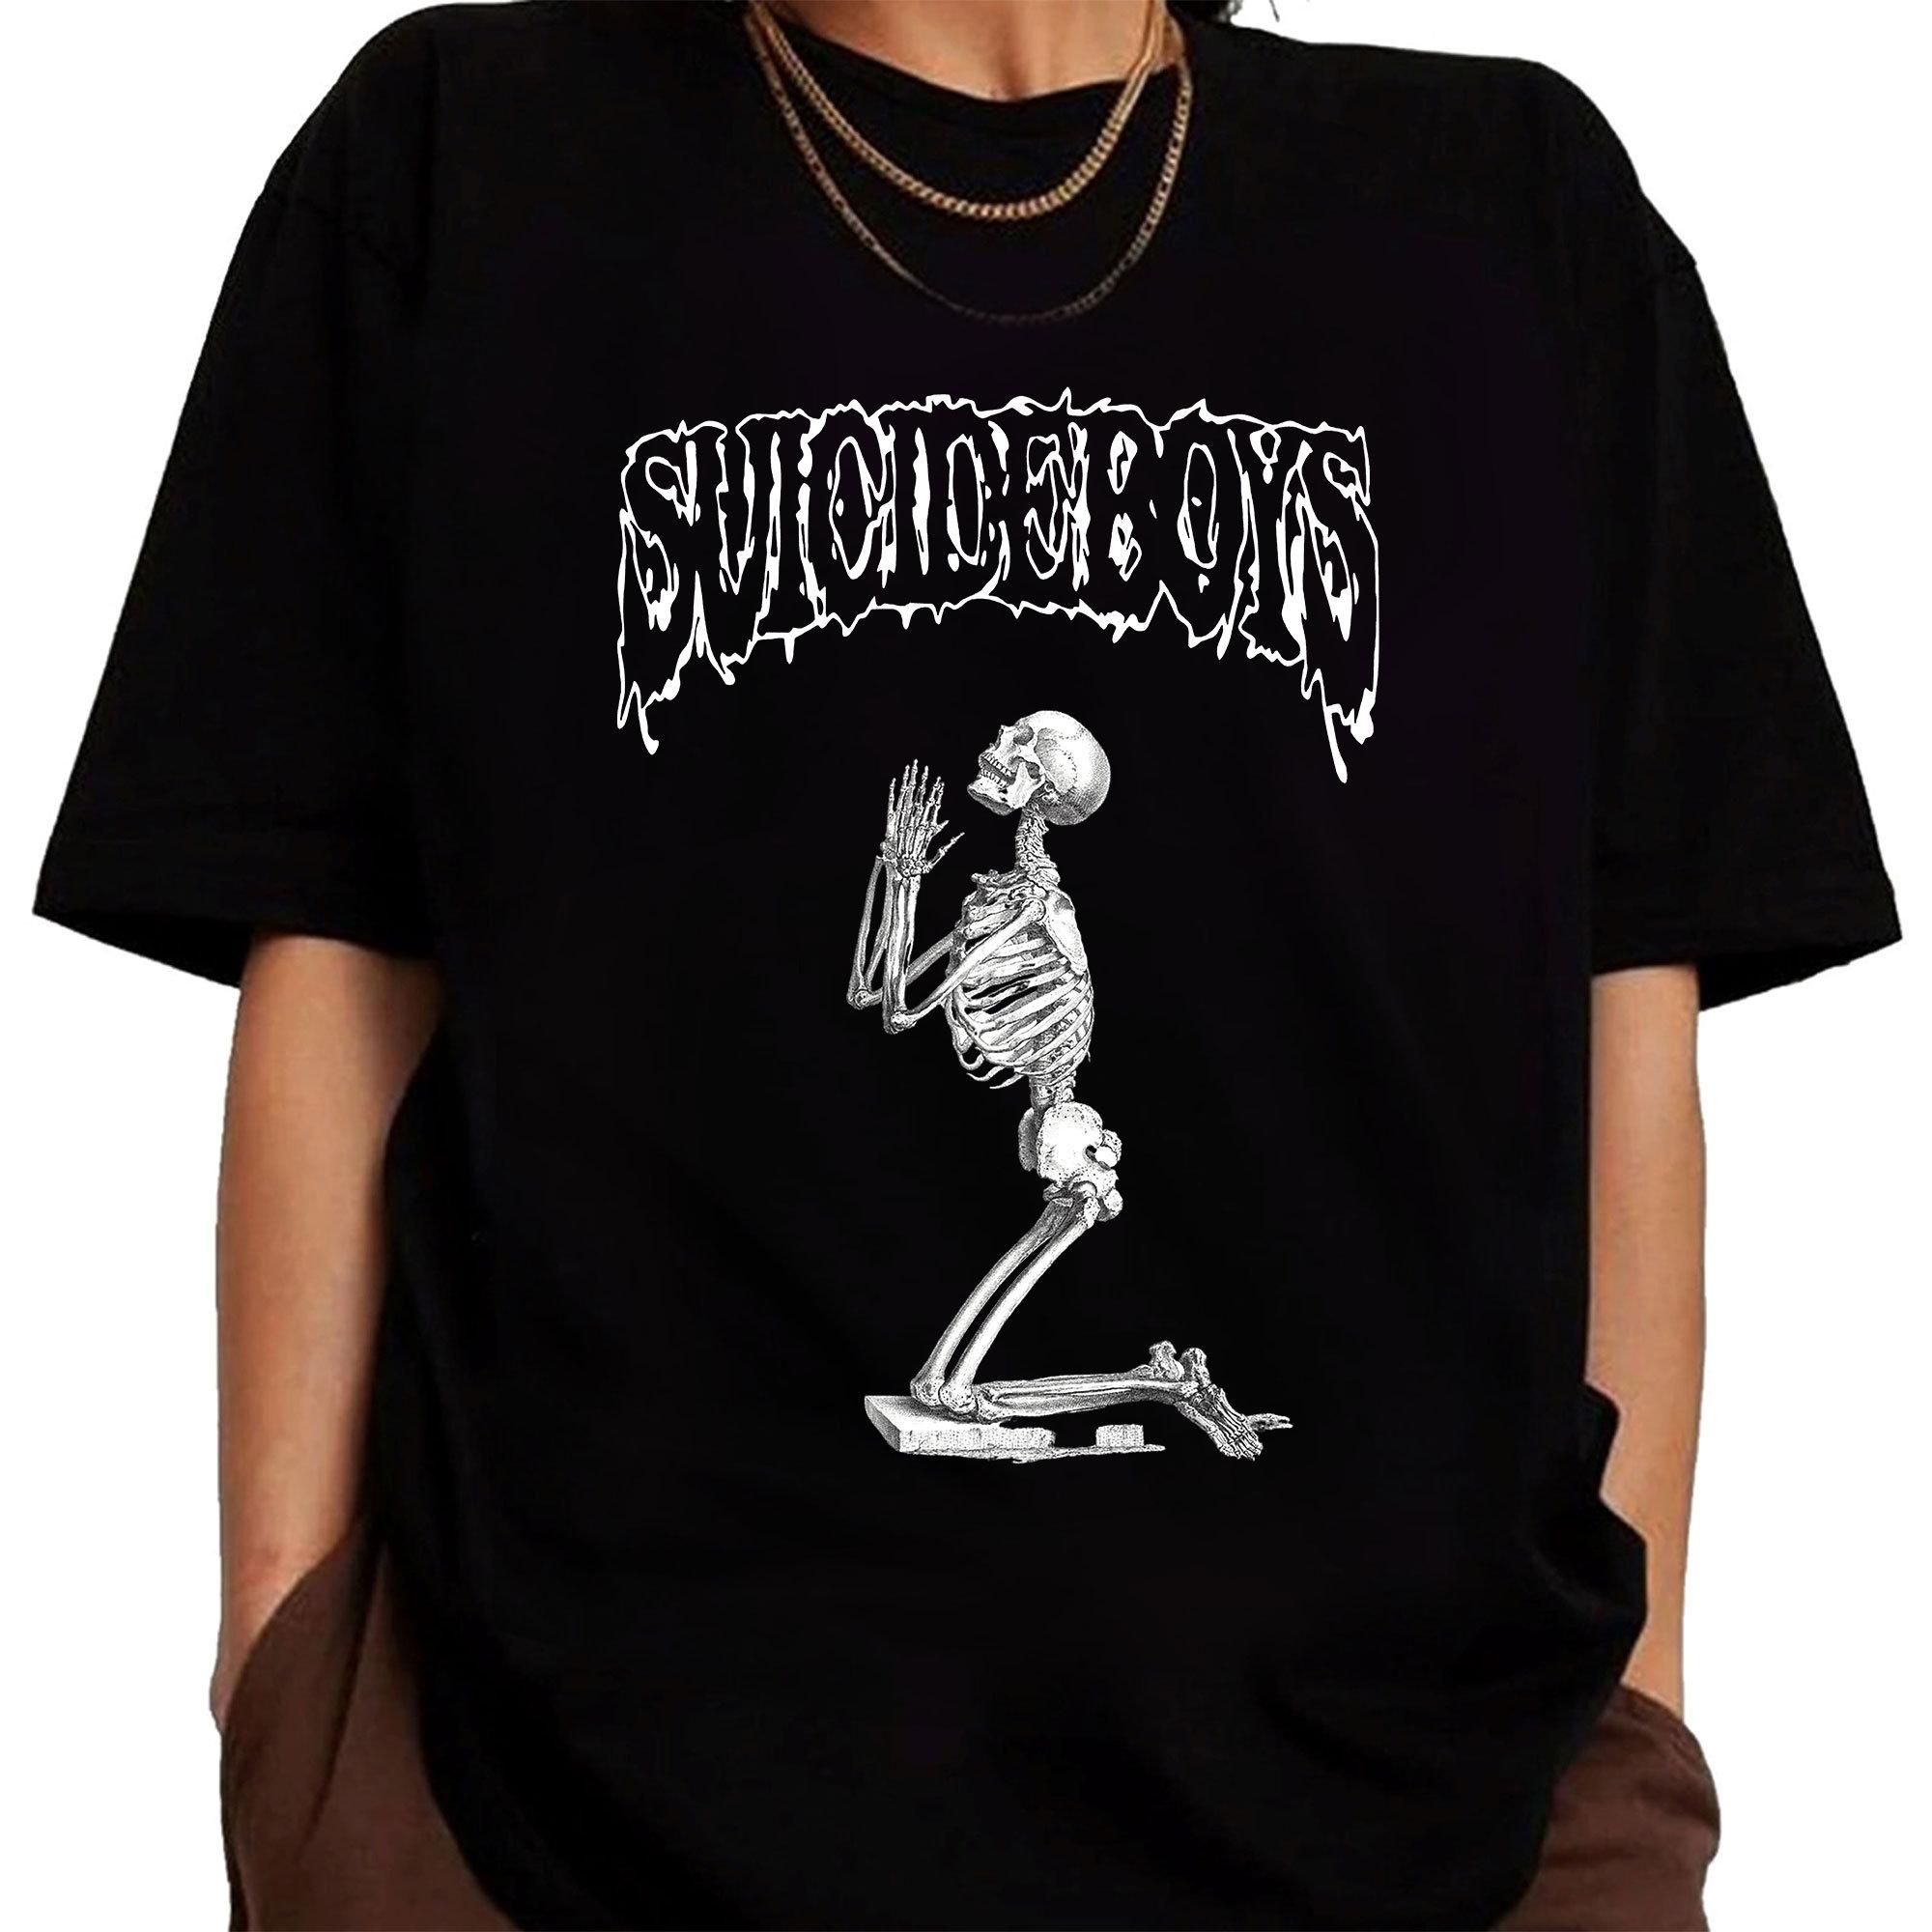 Vintage Suicide Boys Shirt, Suicideboys Merch, Suicide Boys Now The Moon’s Rising Album Poster Design Graphic Tee Gift, Unisex T-Shirt, Gifts For Him, Short Sleeve Tee Shirt, Gifts For Birthday Men Day Christmas